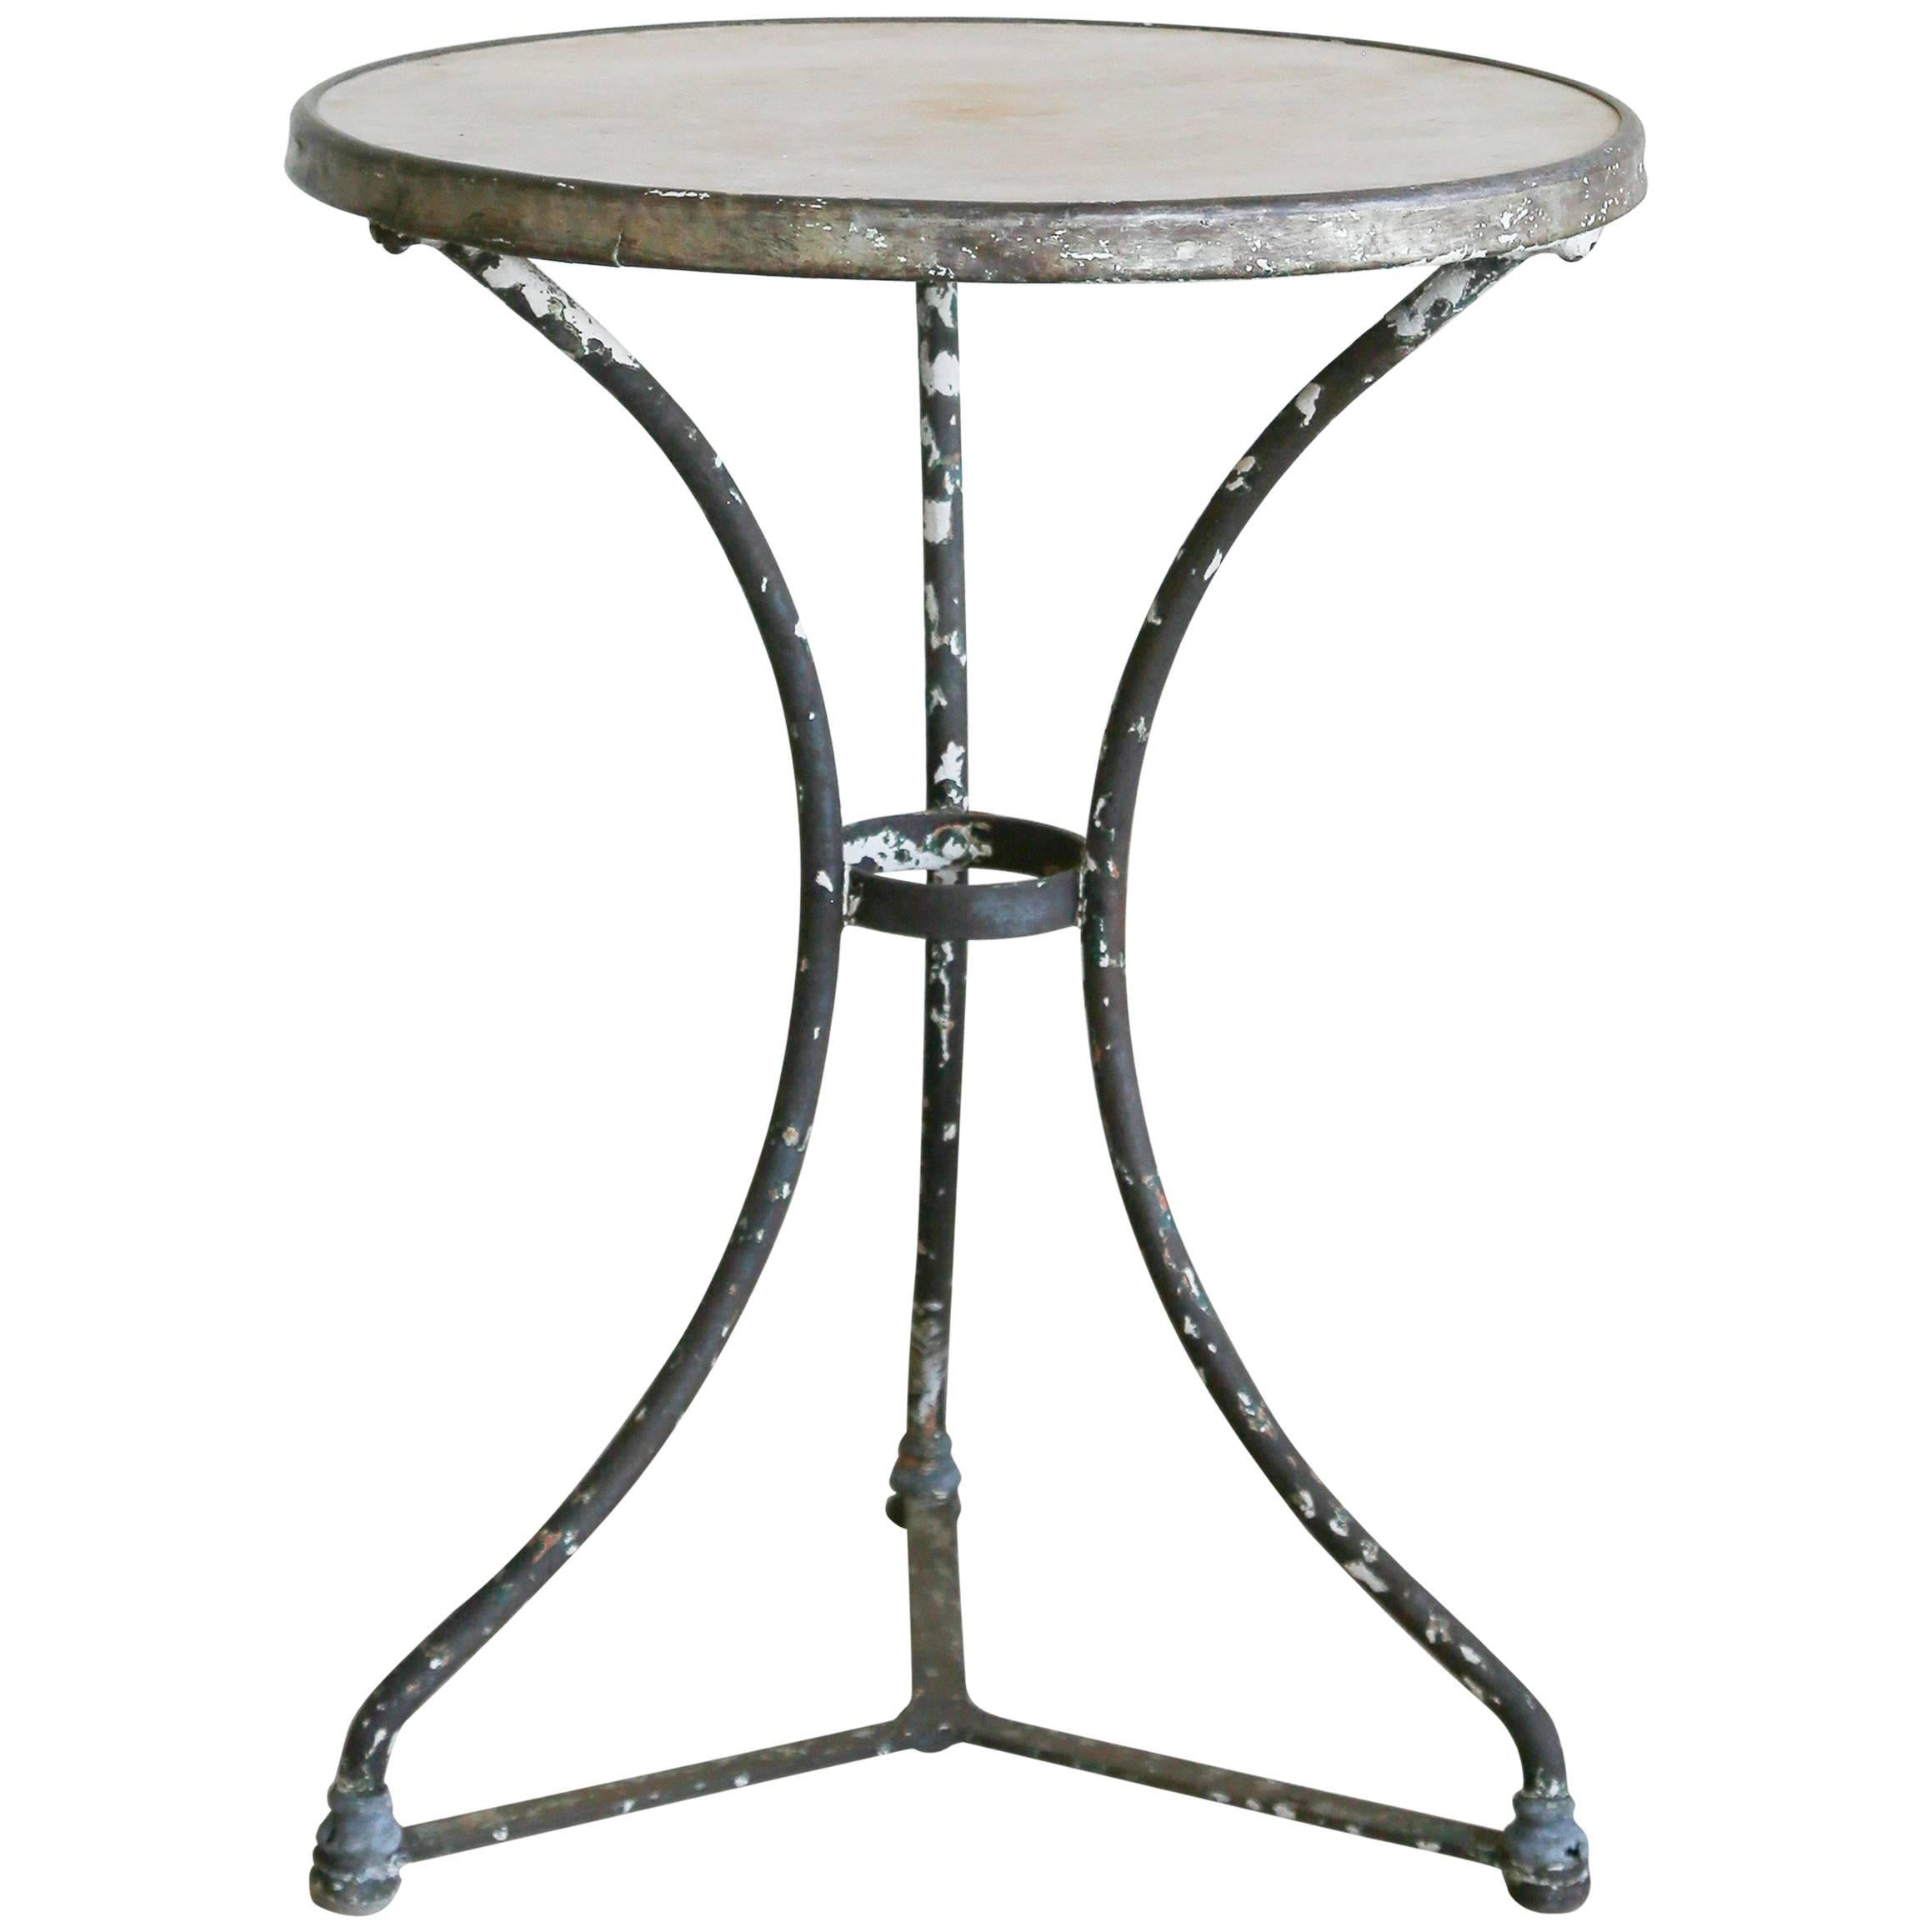 Early 20th Century Antique Cafe Table